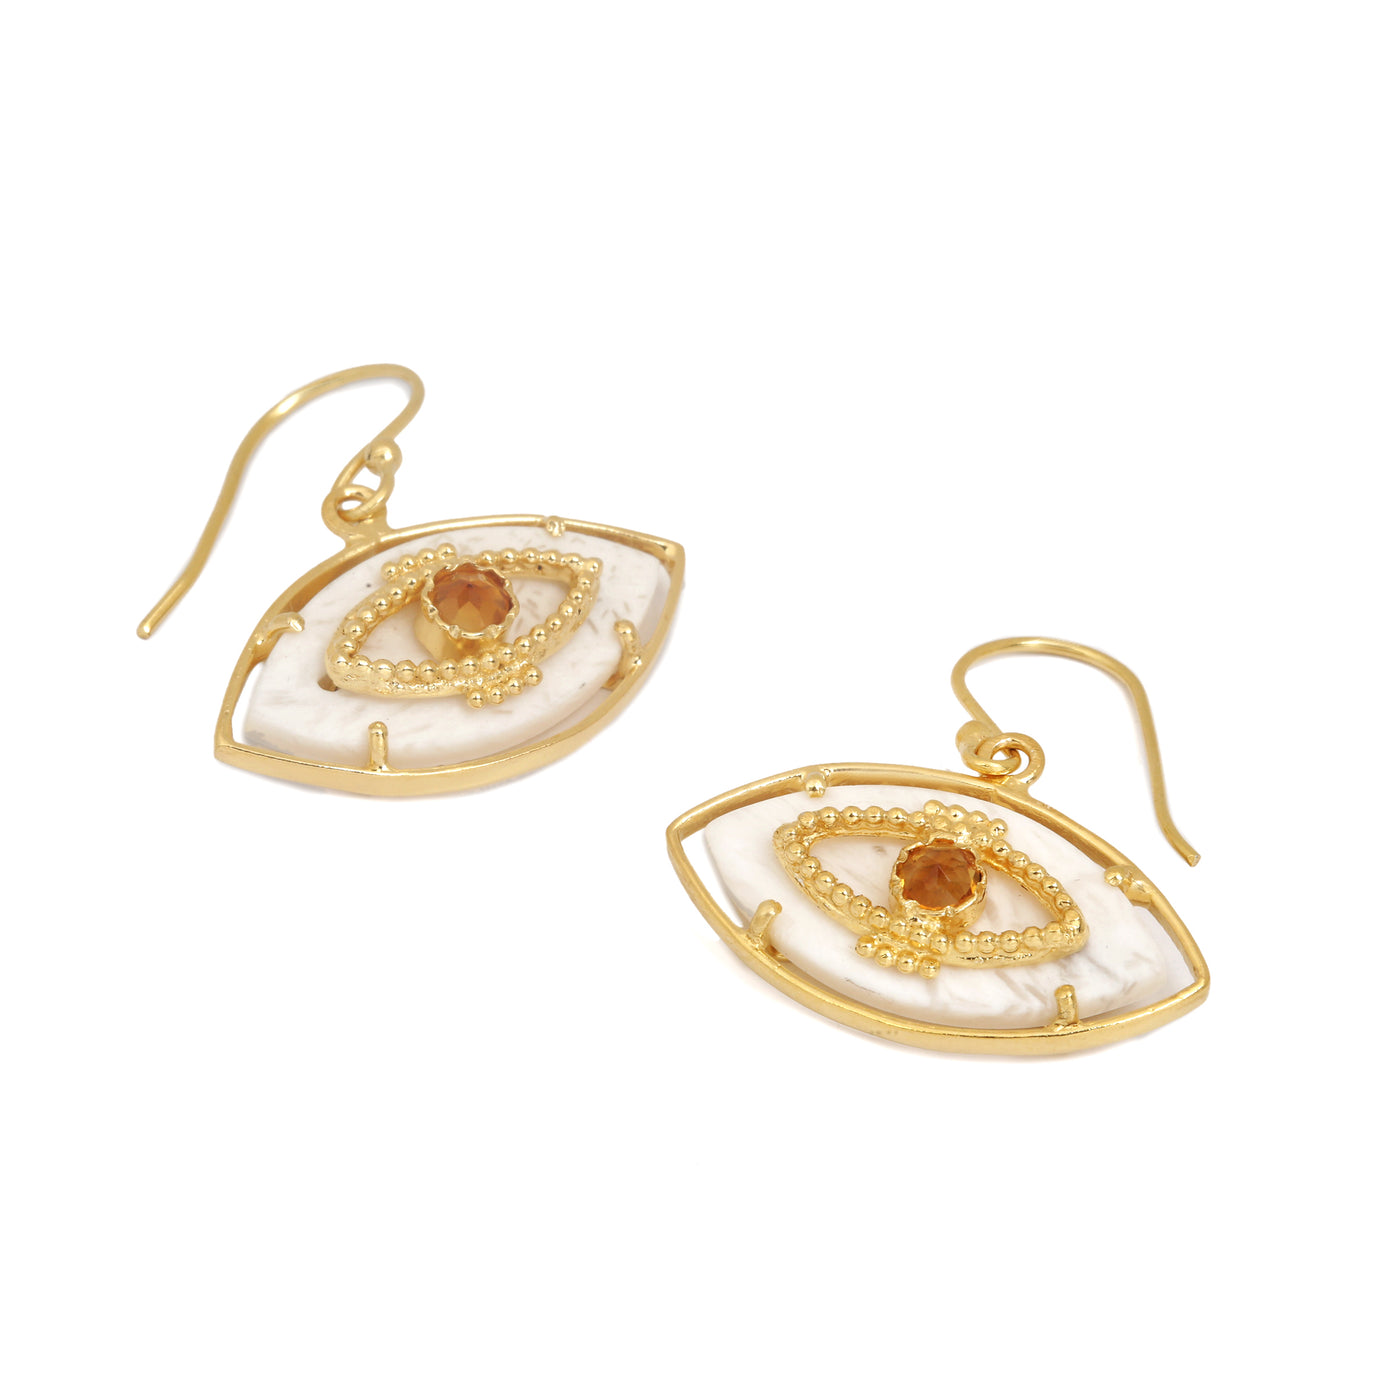 MARQUISE_EYE_EARRING_Scollecite